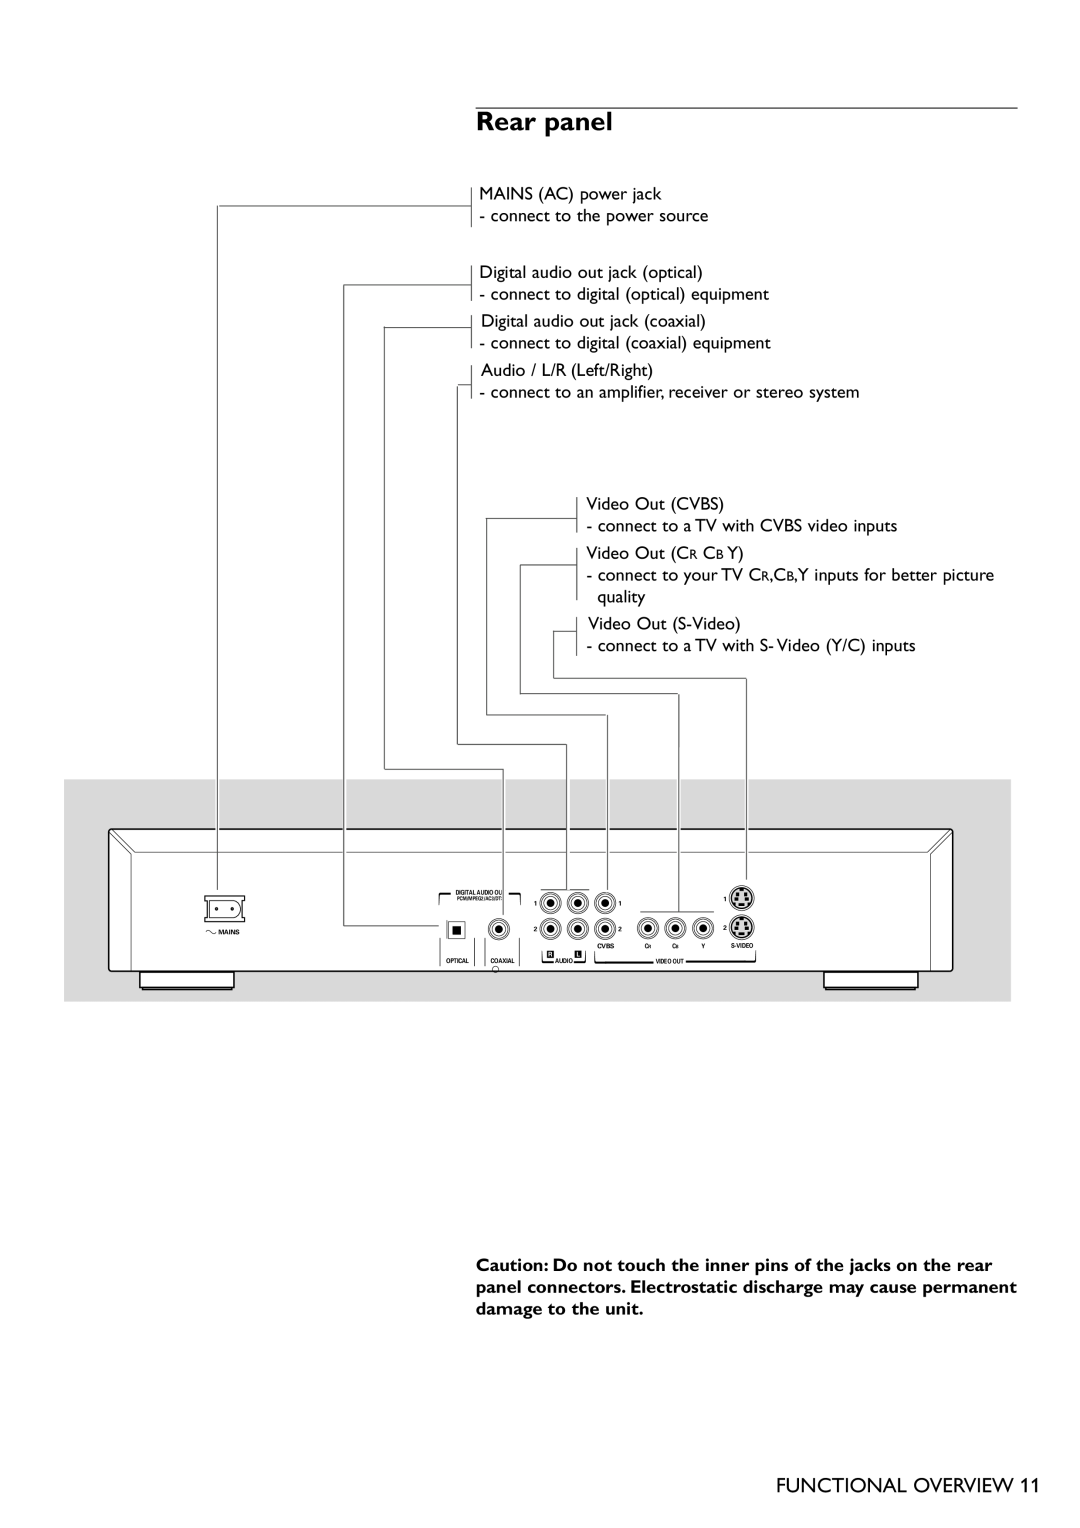 Philips DVD751 manual Rear panel, Functional Overview 